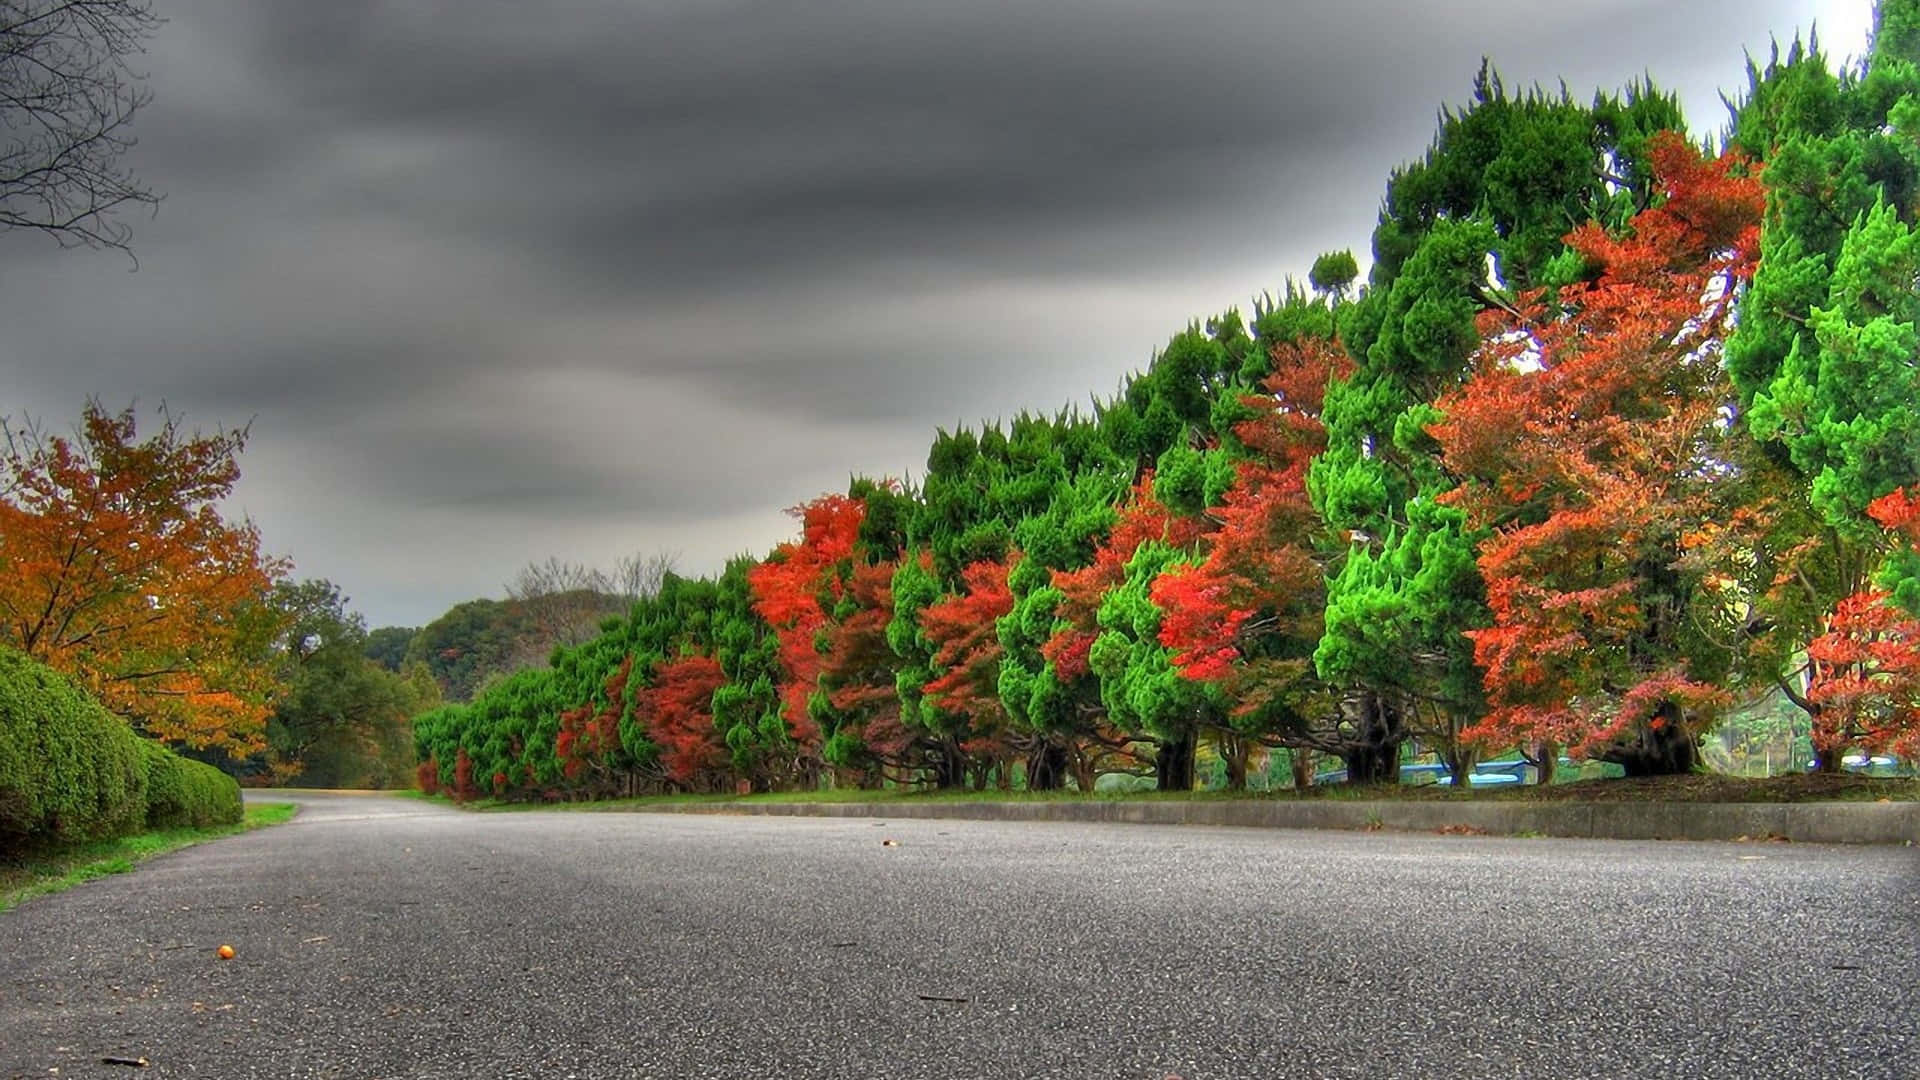 a road lined with trees with colorful leaves